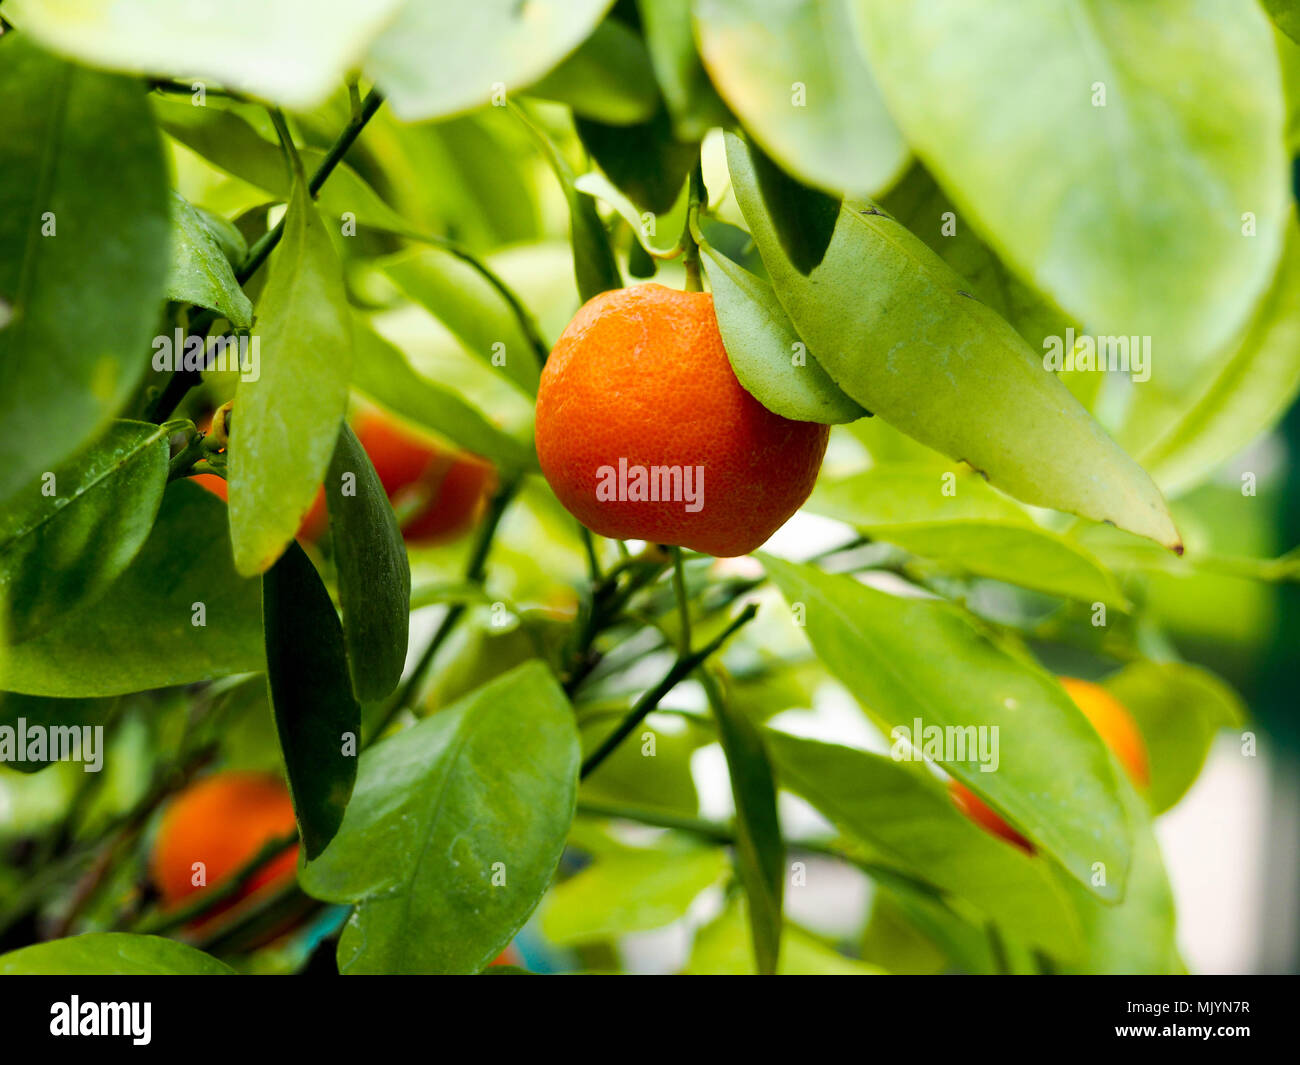 mandarin fruits on a tree, background, Ripe tangerines on a tree branch. Stock Photo